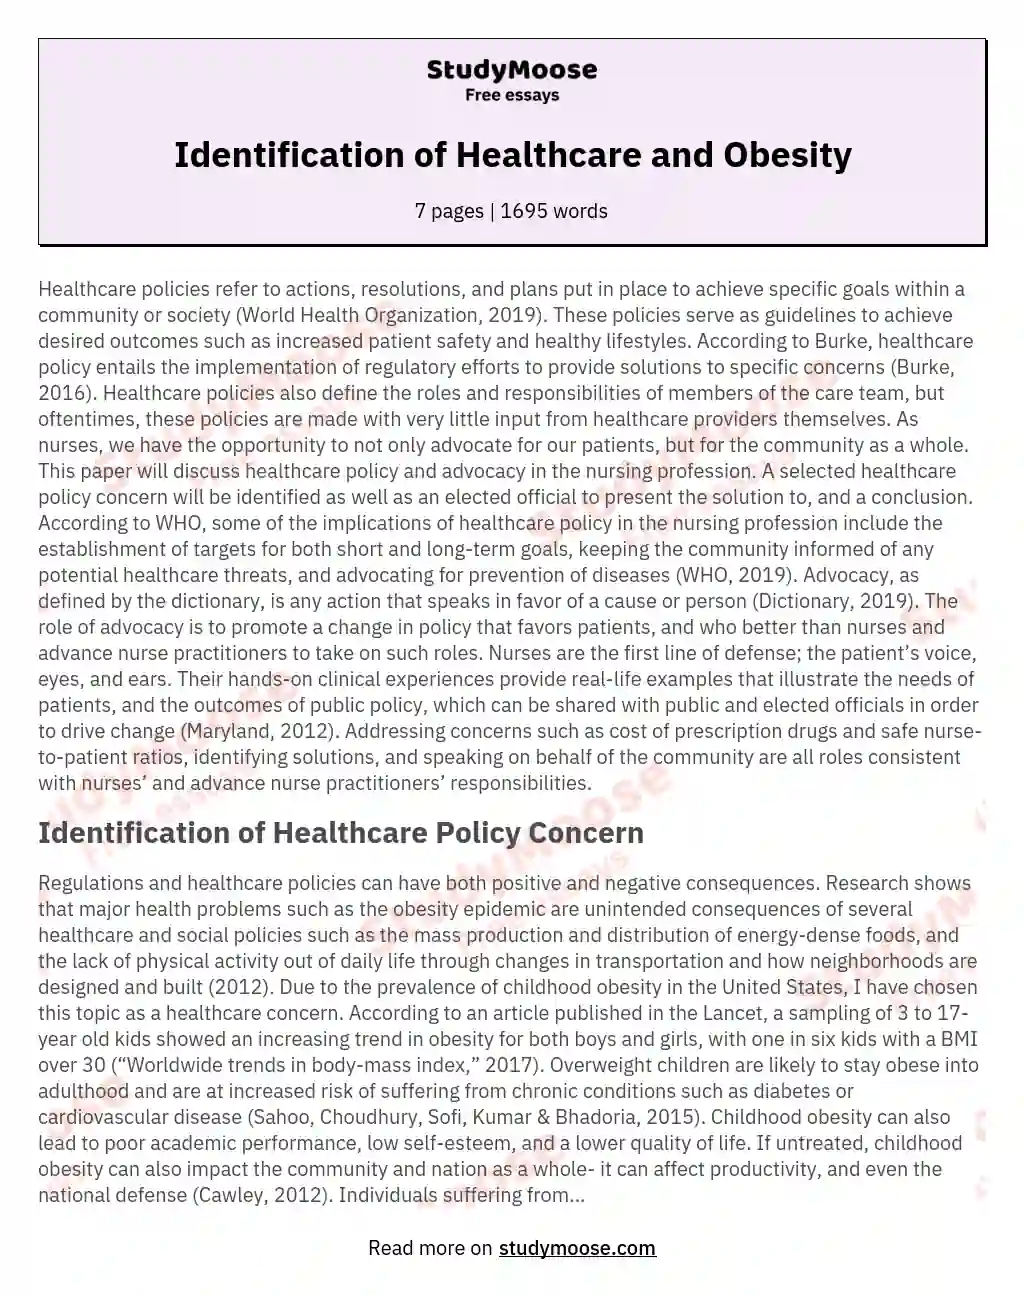 Identification of Healthcare and Obesity essay